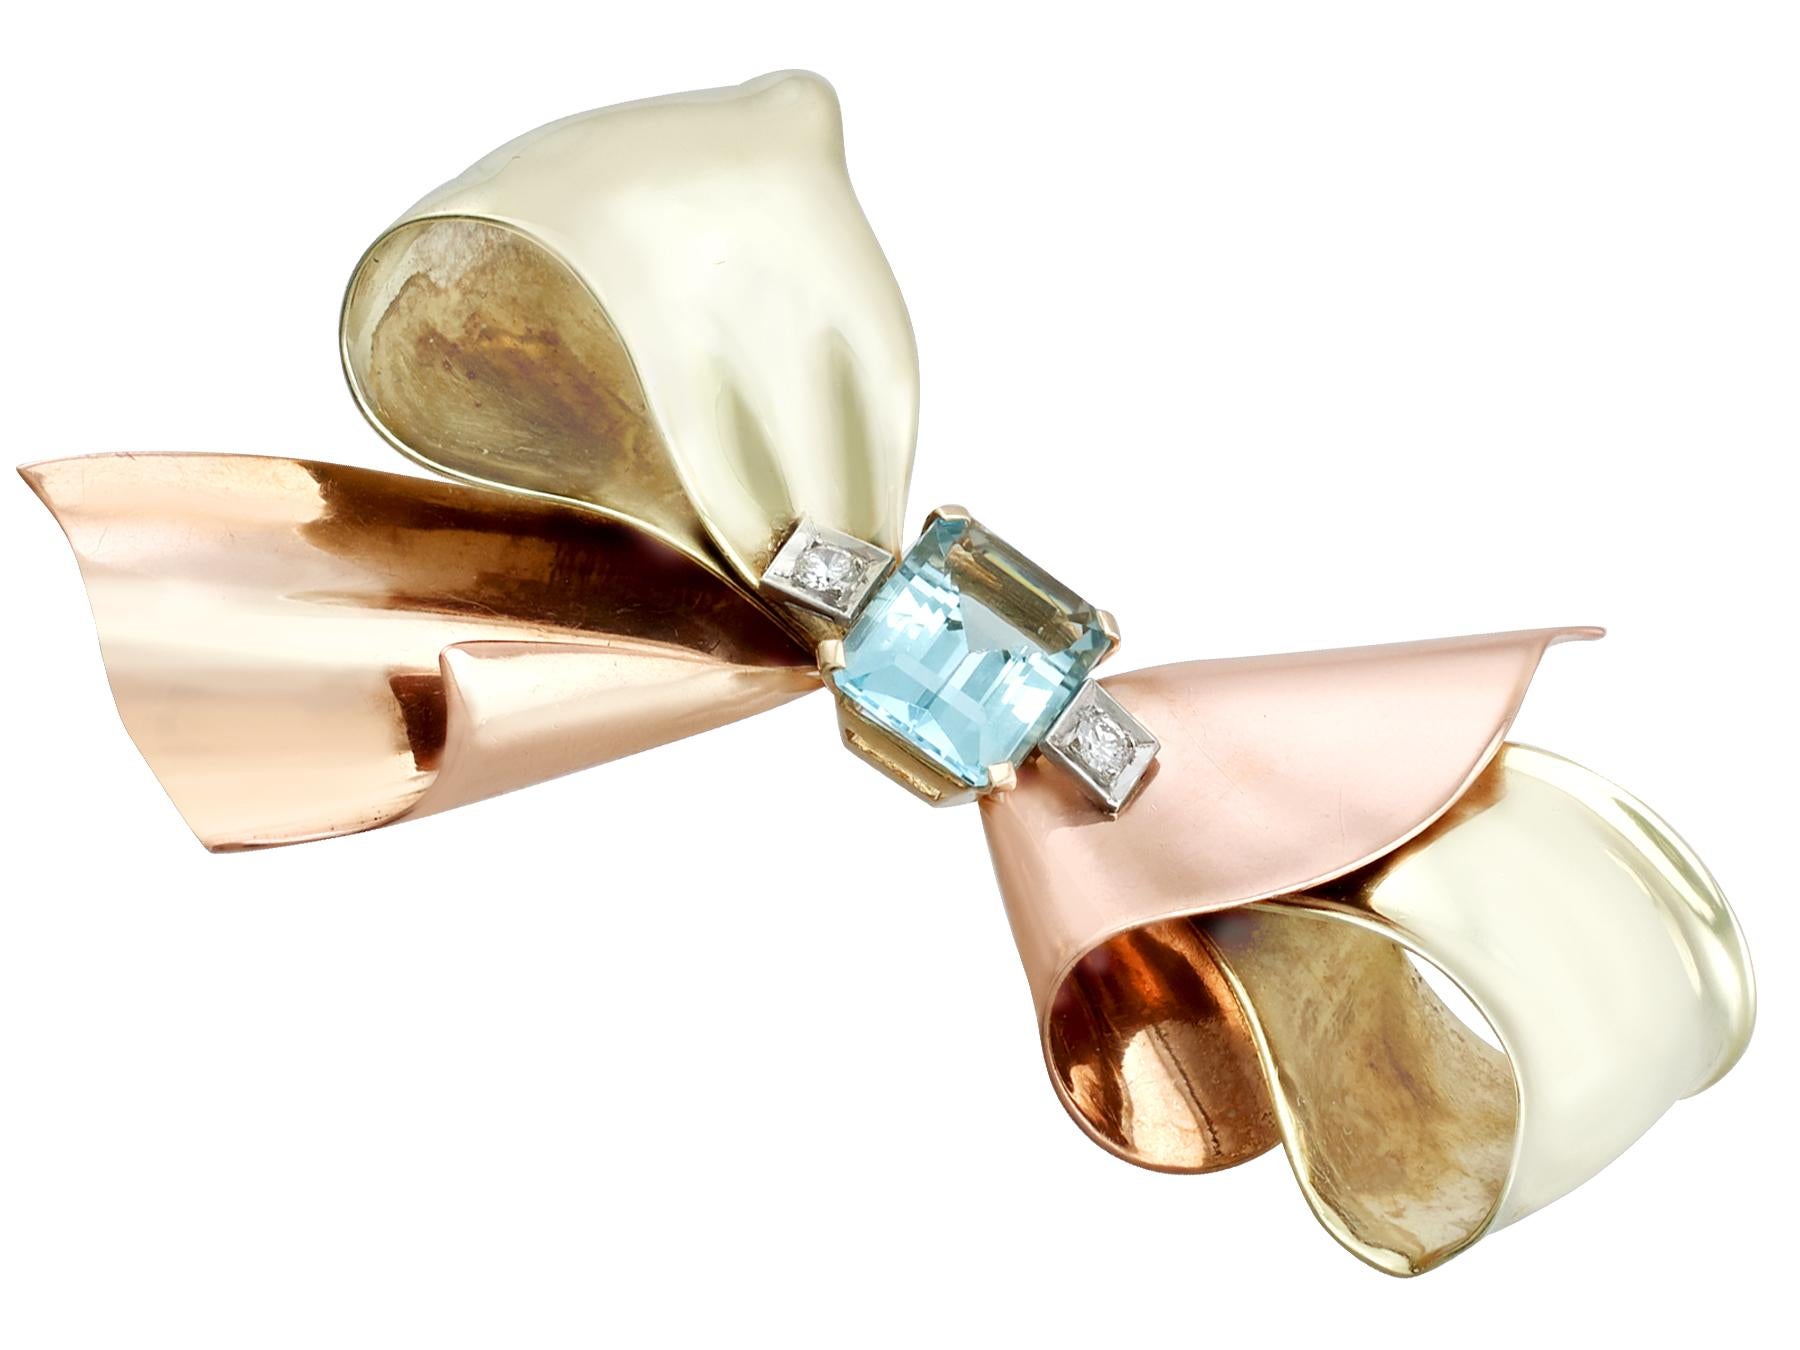 A stunning vintage 1940's 3.26 carat aquamarine and 0.08 carat diamond, 14 carat rose, yellow and white gold 'bow' brooch; part of our diverse vintage jewellery collections.

This stunning, fine and impressive aquamarine bow brooch has been crafted